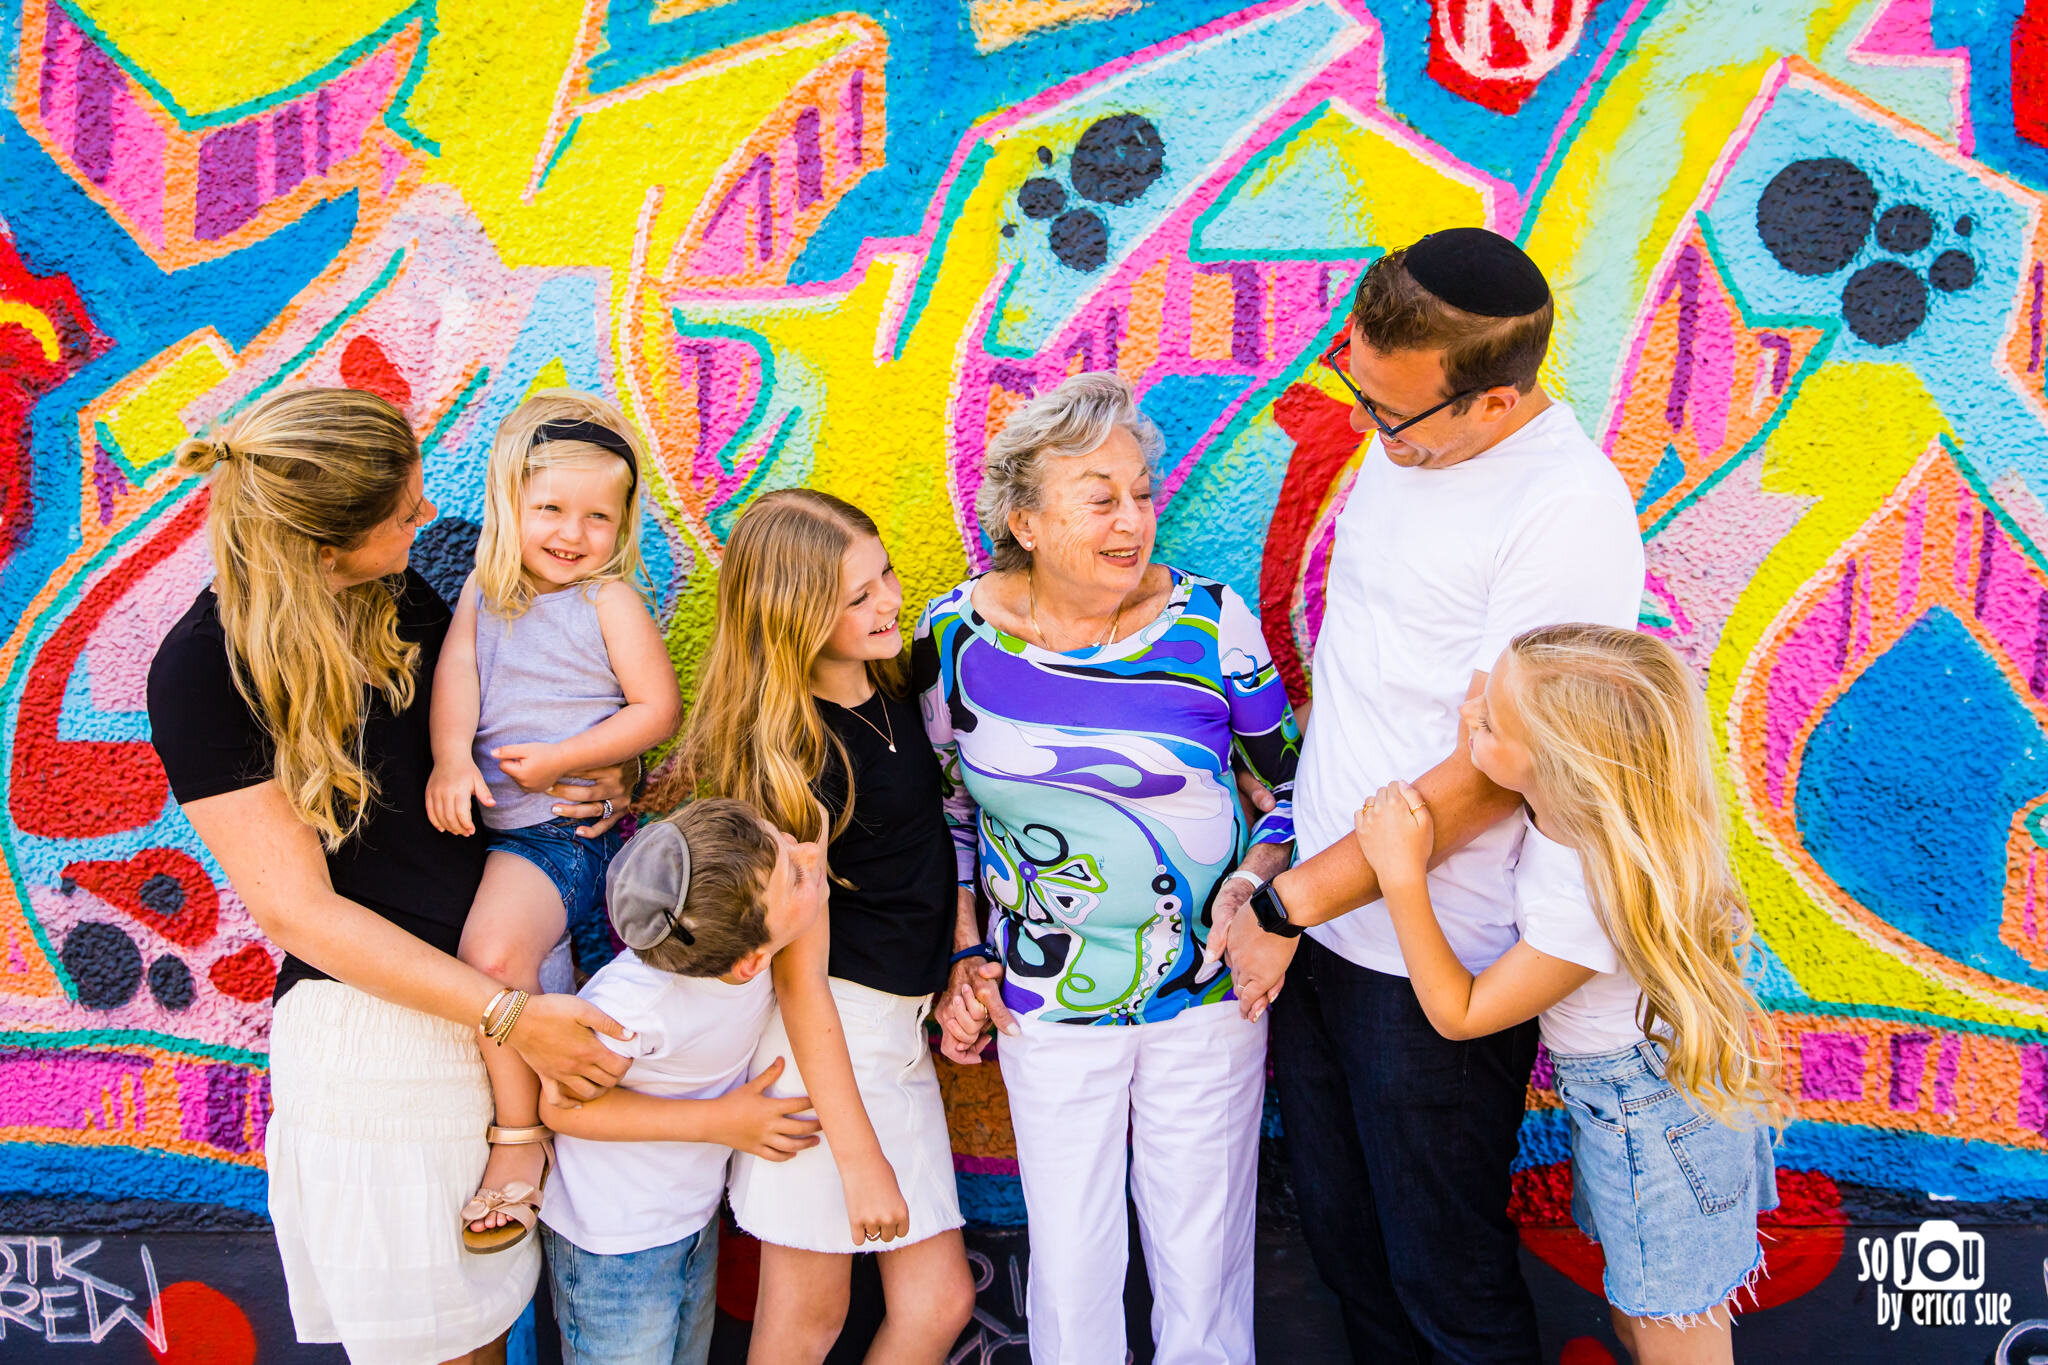 5-so-you-by-erica-sue-extended-family-session-wynwood-lifestyle-photographer-CD8A6997.jpg